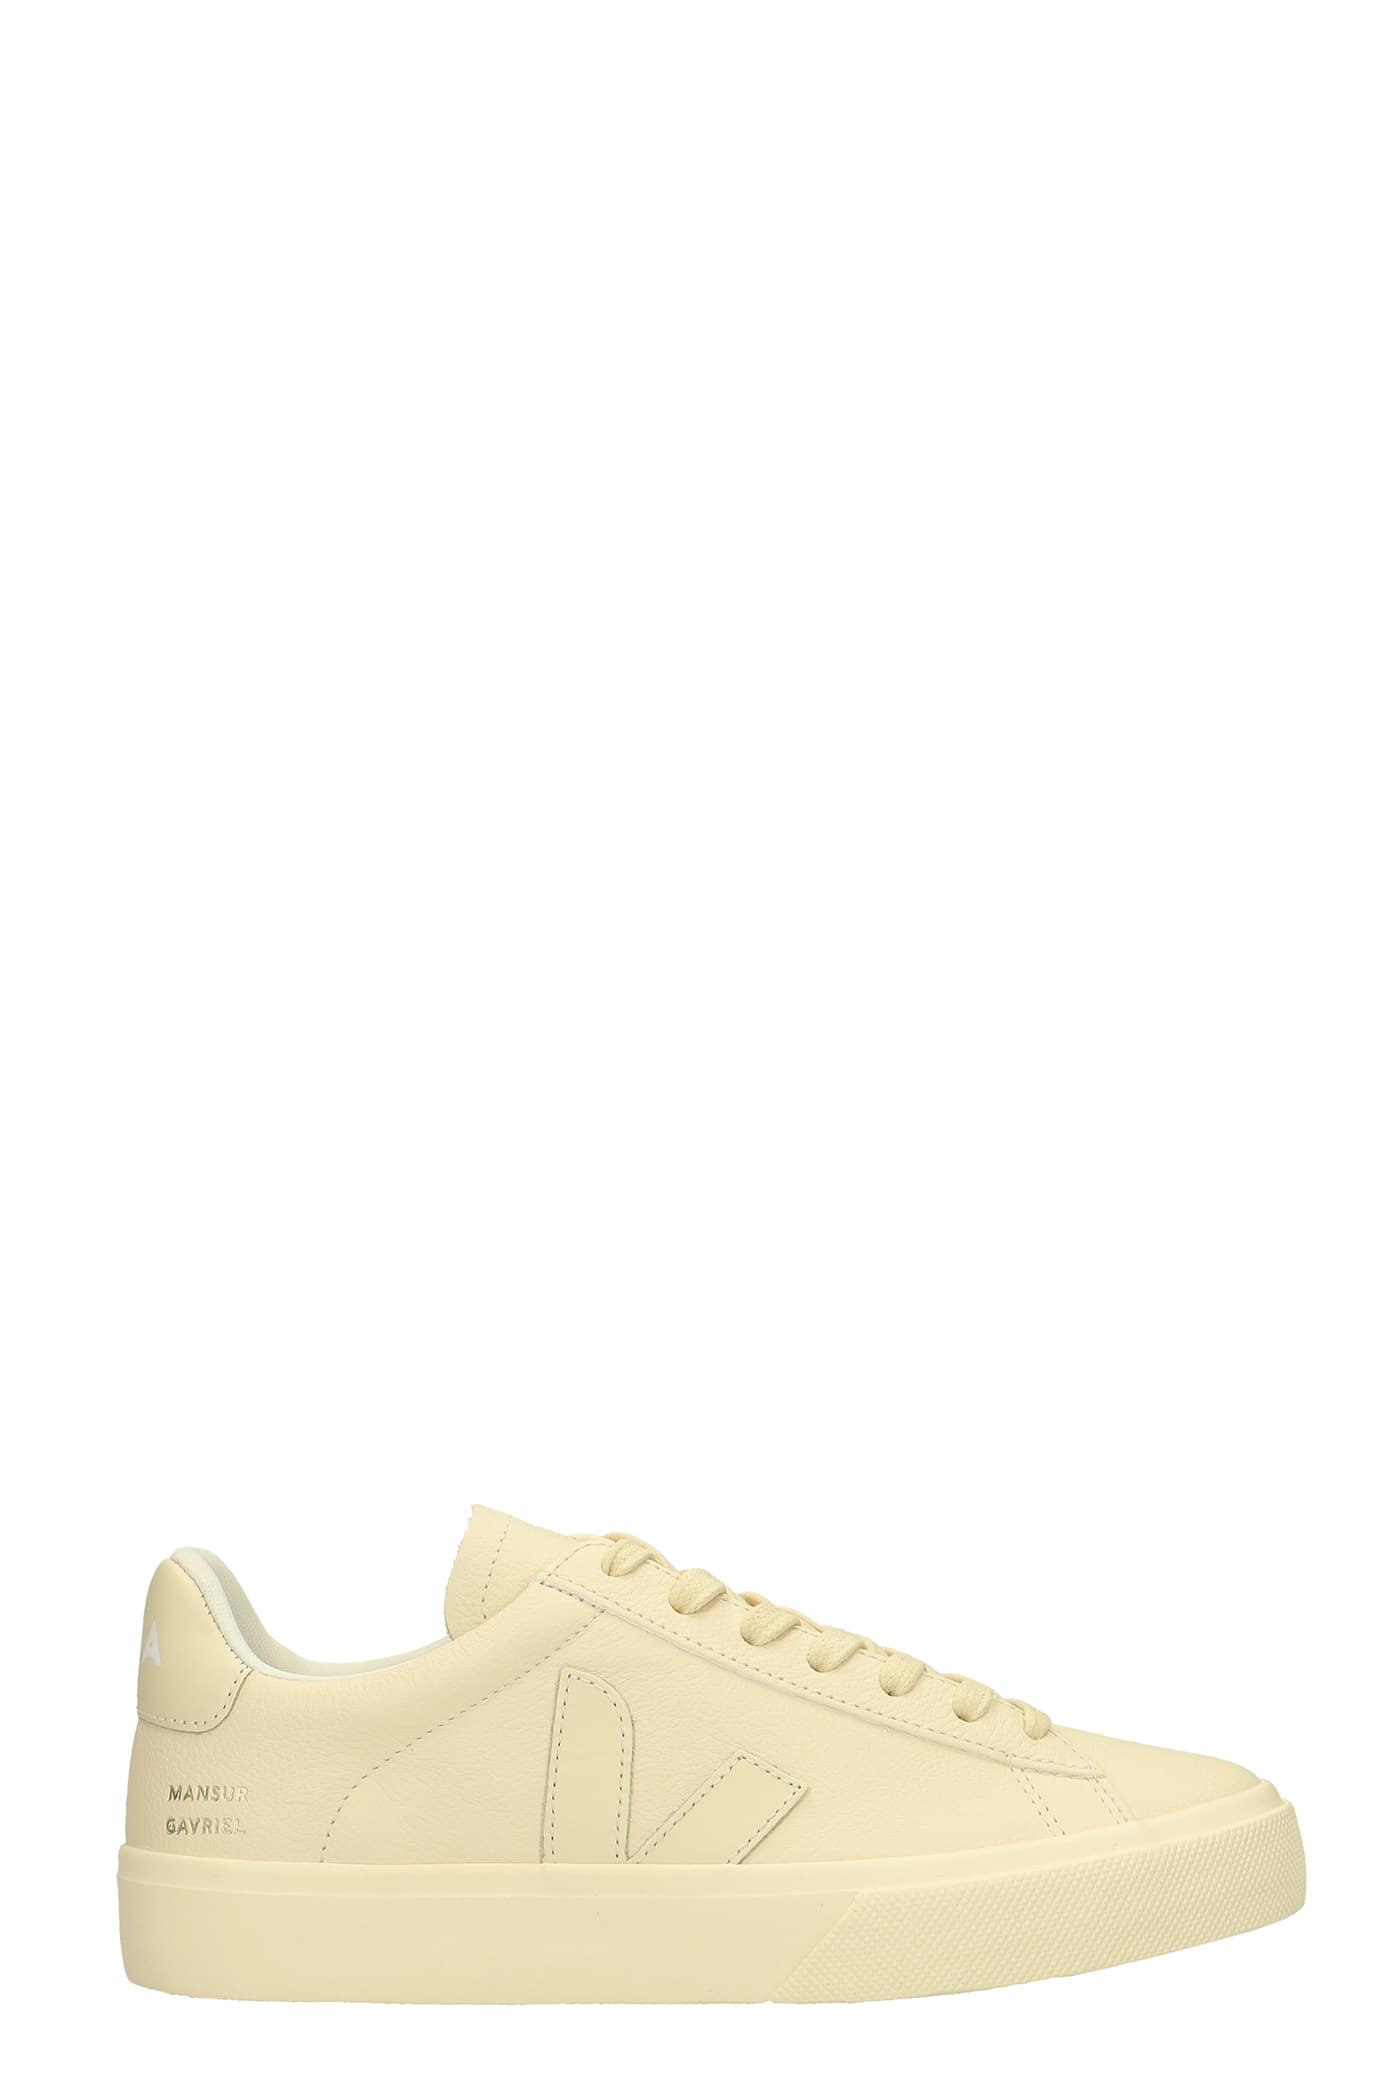 Veja Campo Sneakers In Beige Leather